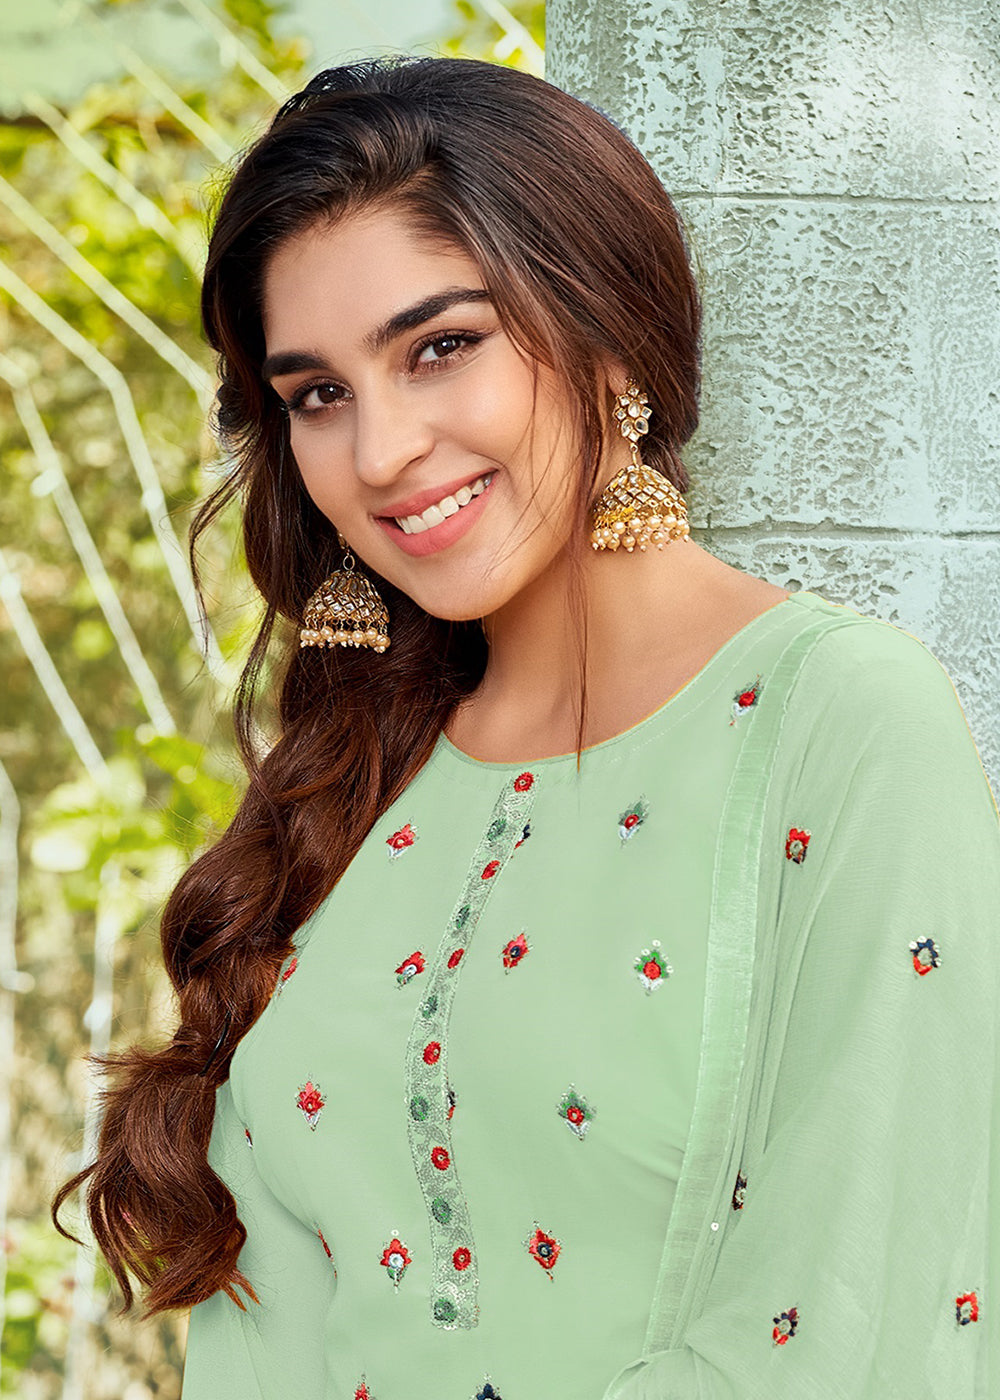 Buy Now Riveting Sea Green Punjabi Style Embroidered Georgette Patiala Suit Online in USA, UK, Canada, Germany, Australia & Worldwide at Empress Clothing.